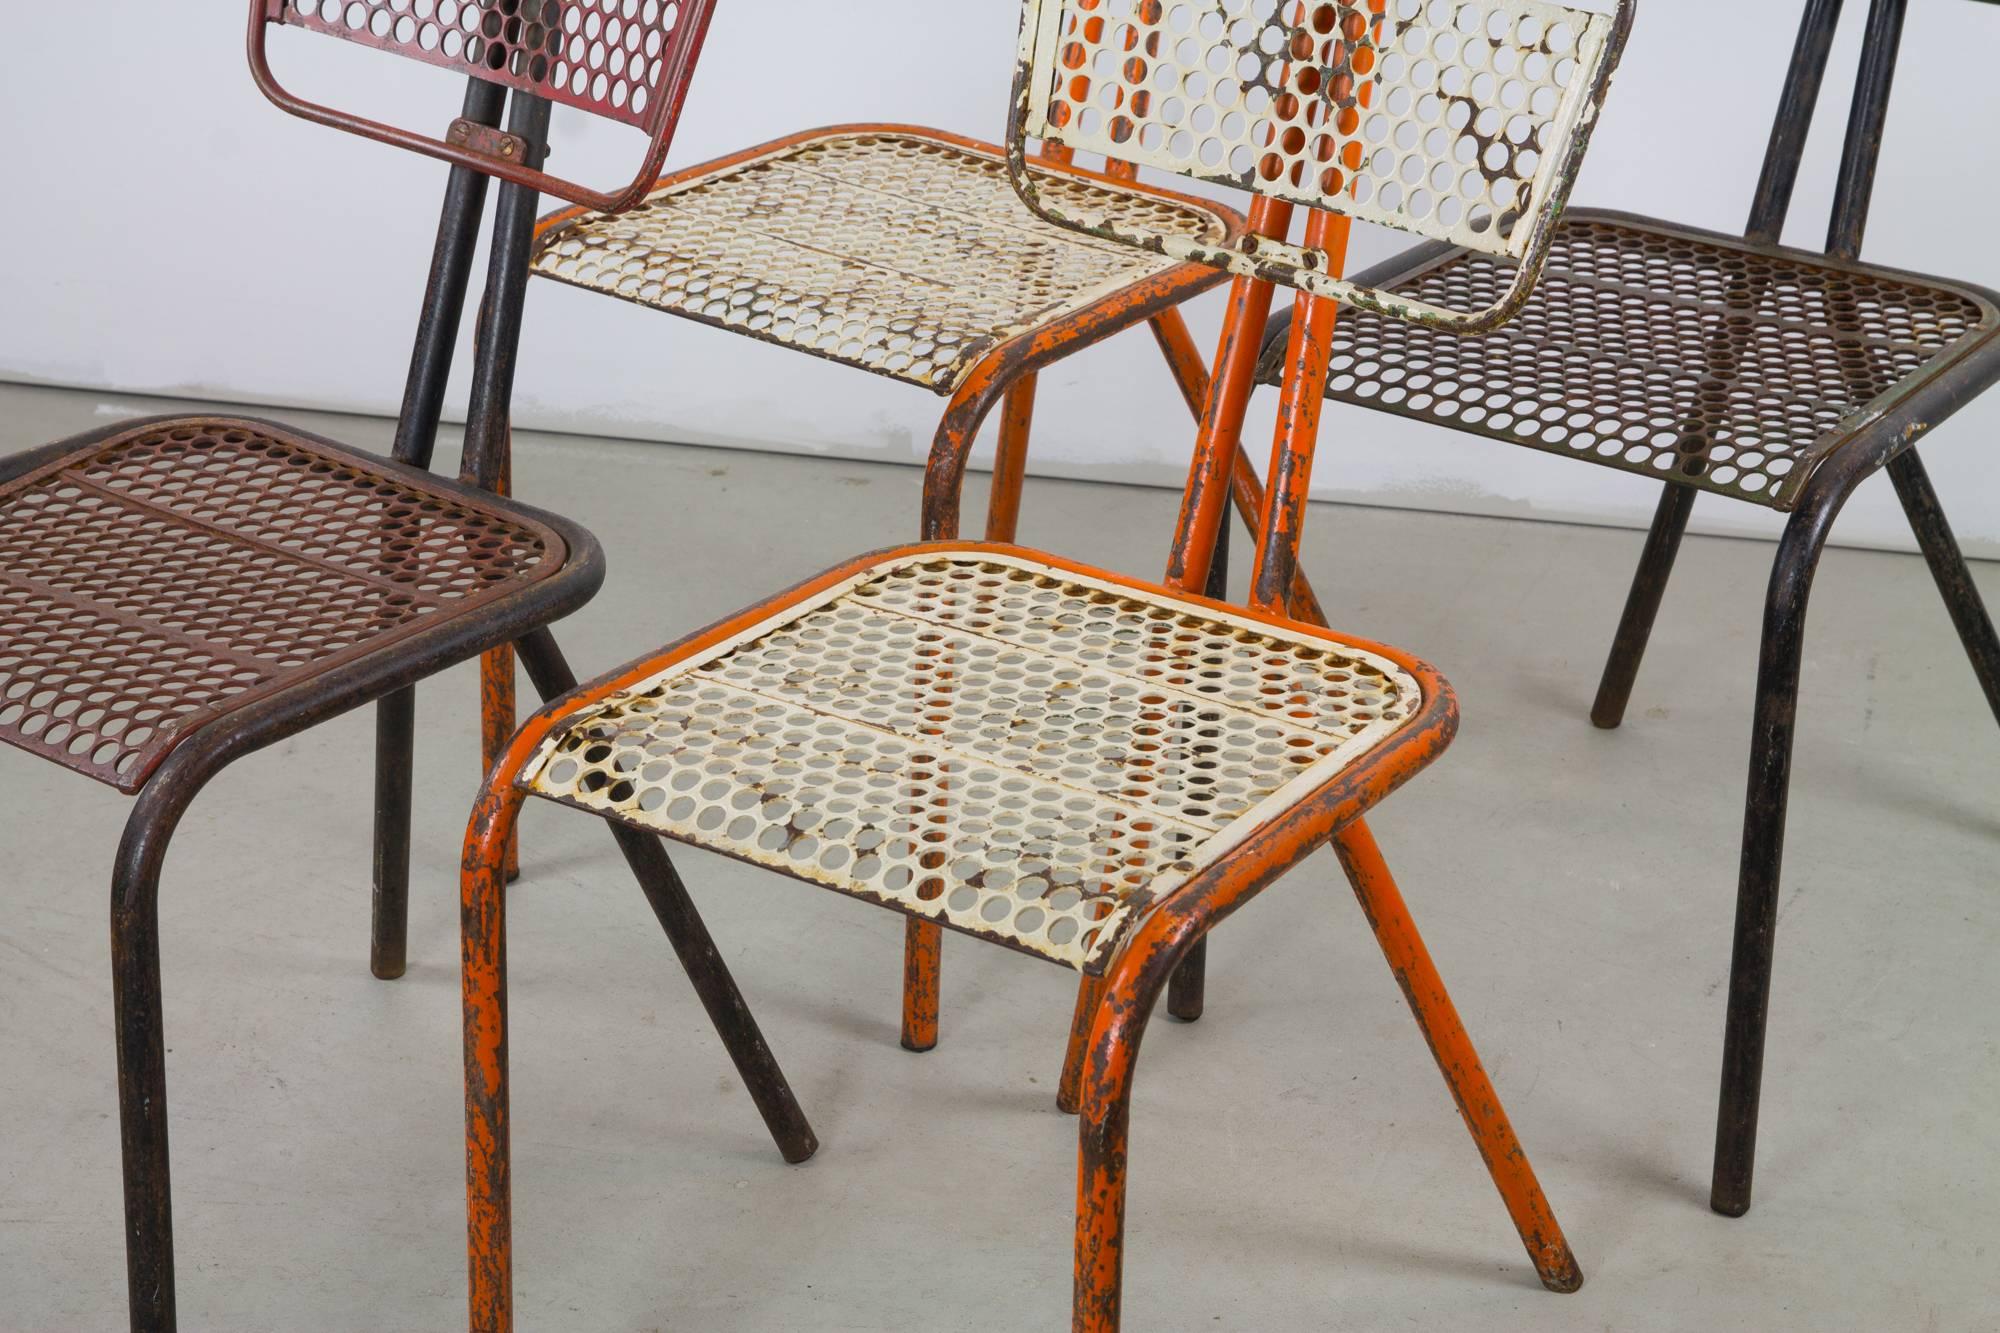 A rare set of four 'Radar' chairs designed by Rene Malaval for Bloc Metal. These perfect post-war French tubular steel chairs incorporate surplus materials from WWII cartridge belts and feature lightweight mesh backrests and seats.